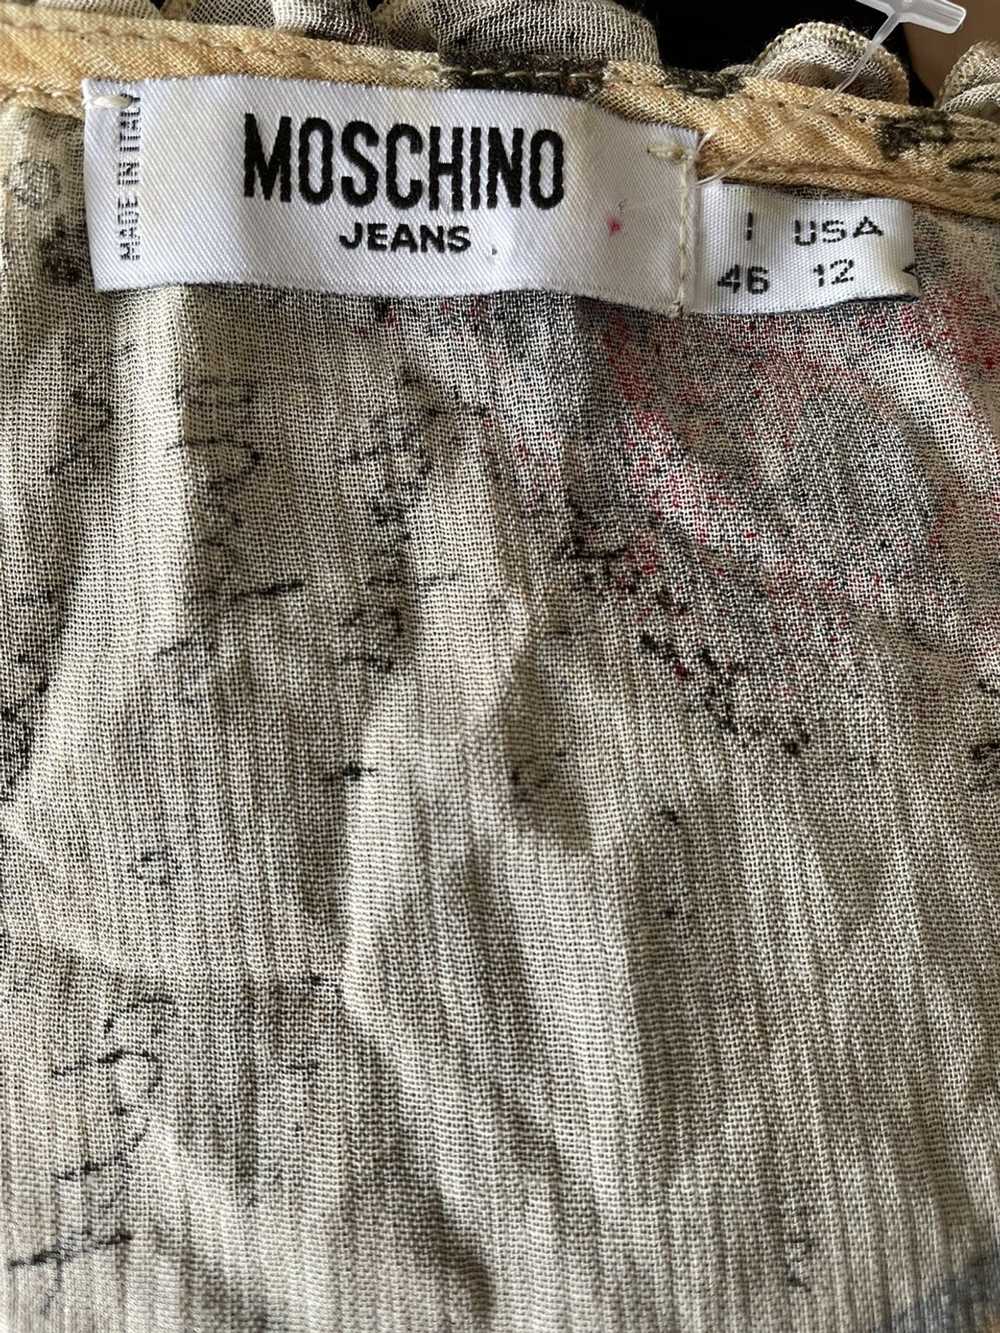 Moschino Moschino y2K / 90s blouse - image 7